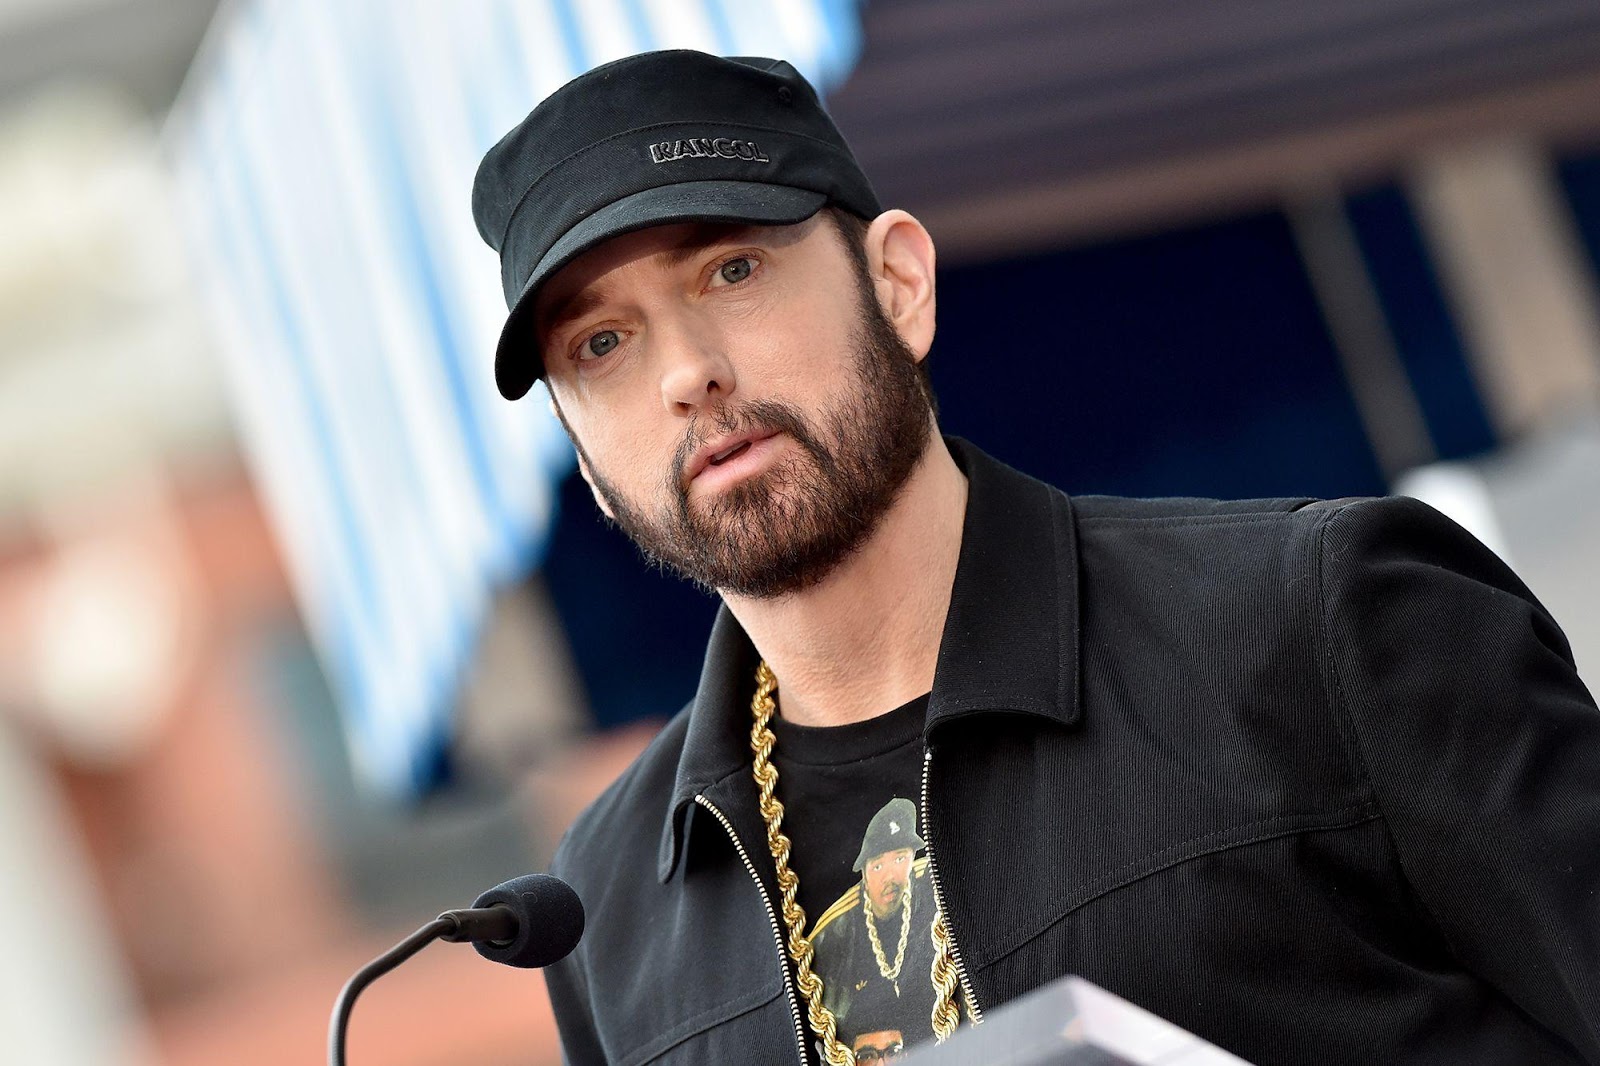 Eminem Net Worth 2022 – Early Life, Career and Earnings